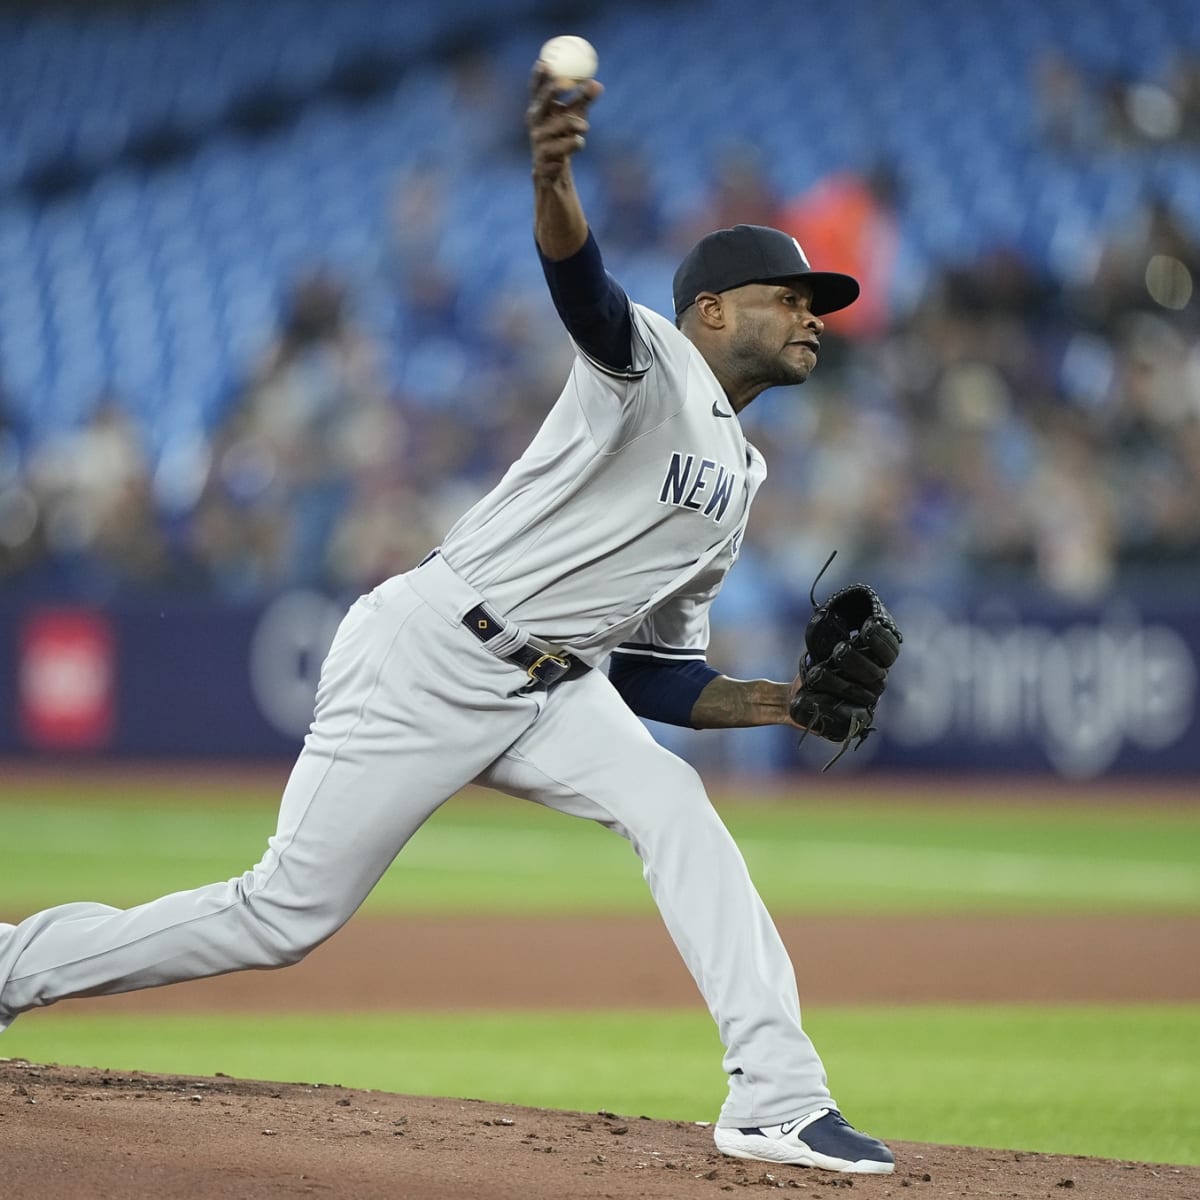 Germán leads Yankees over Twins 6-1 after sticky stuff flap